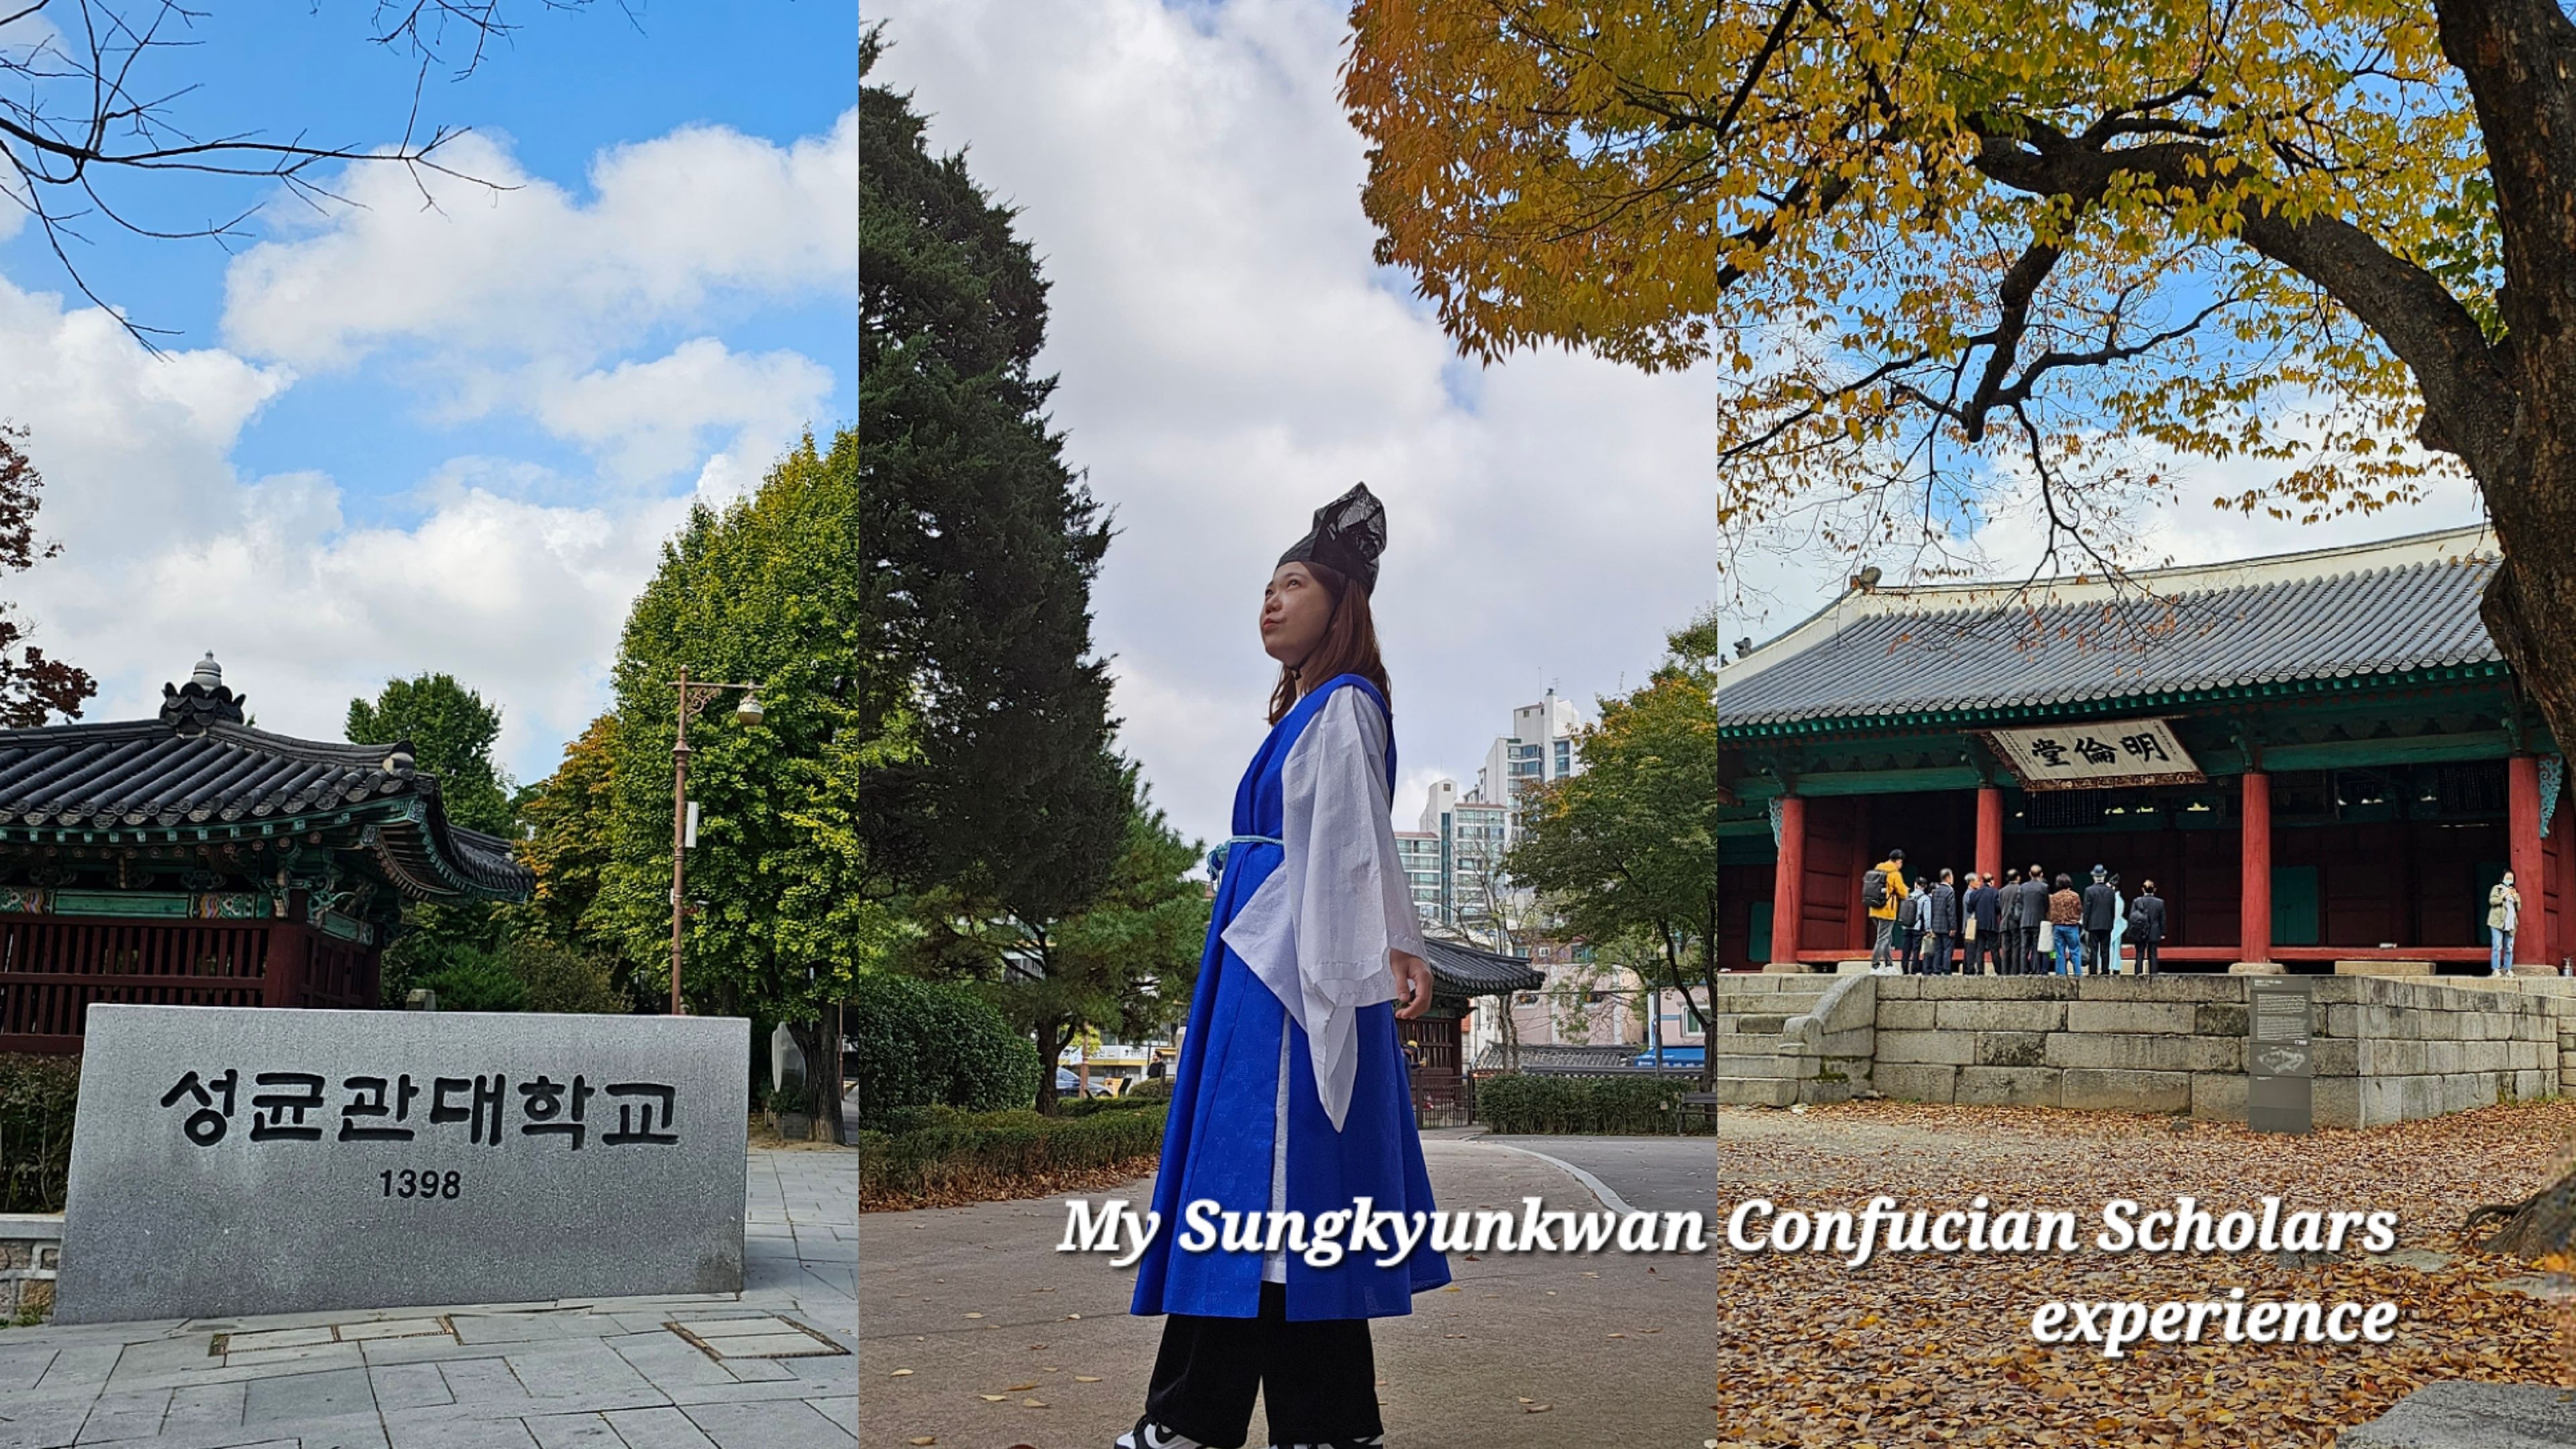 Shown on the left is the main gate of Sungkyunkwan University in Seoul, the writer wearing yusaengbok (scholar costume) is in the center and the lecture hall Myeongryundang is on the right. 